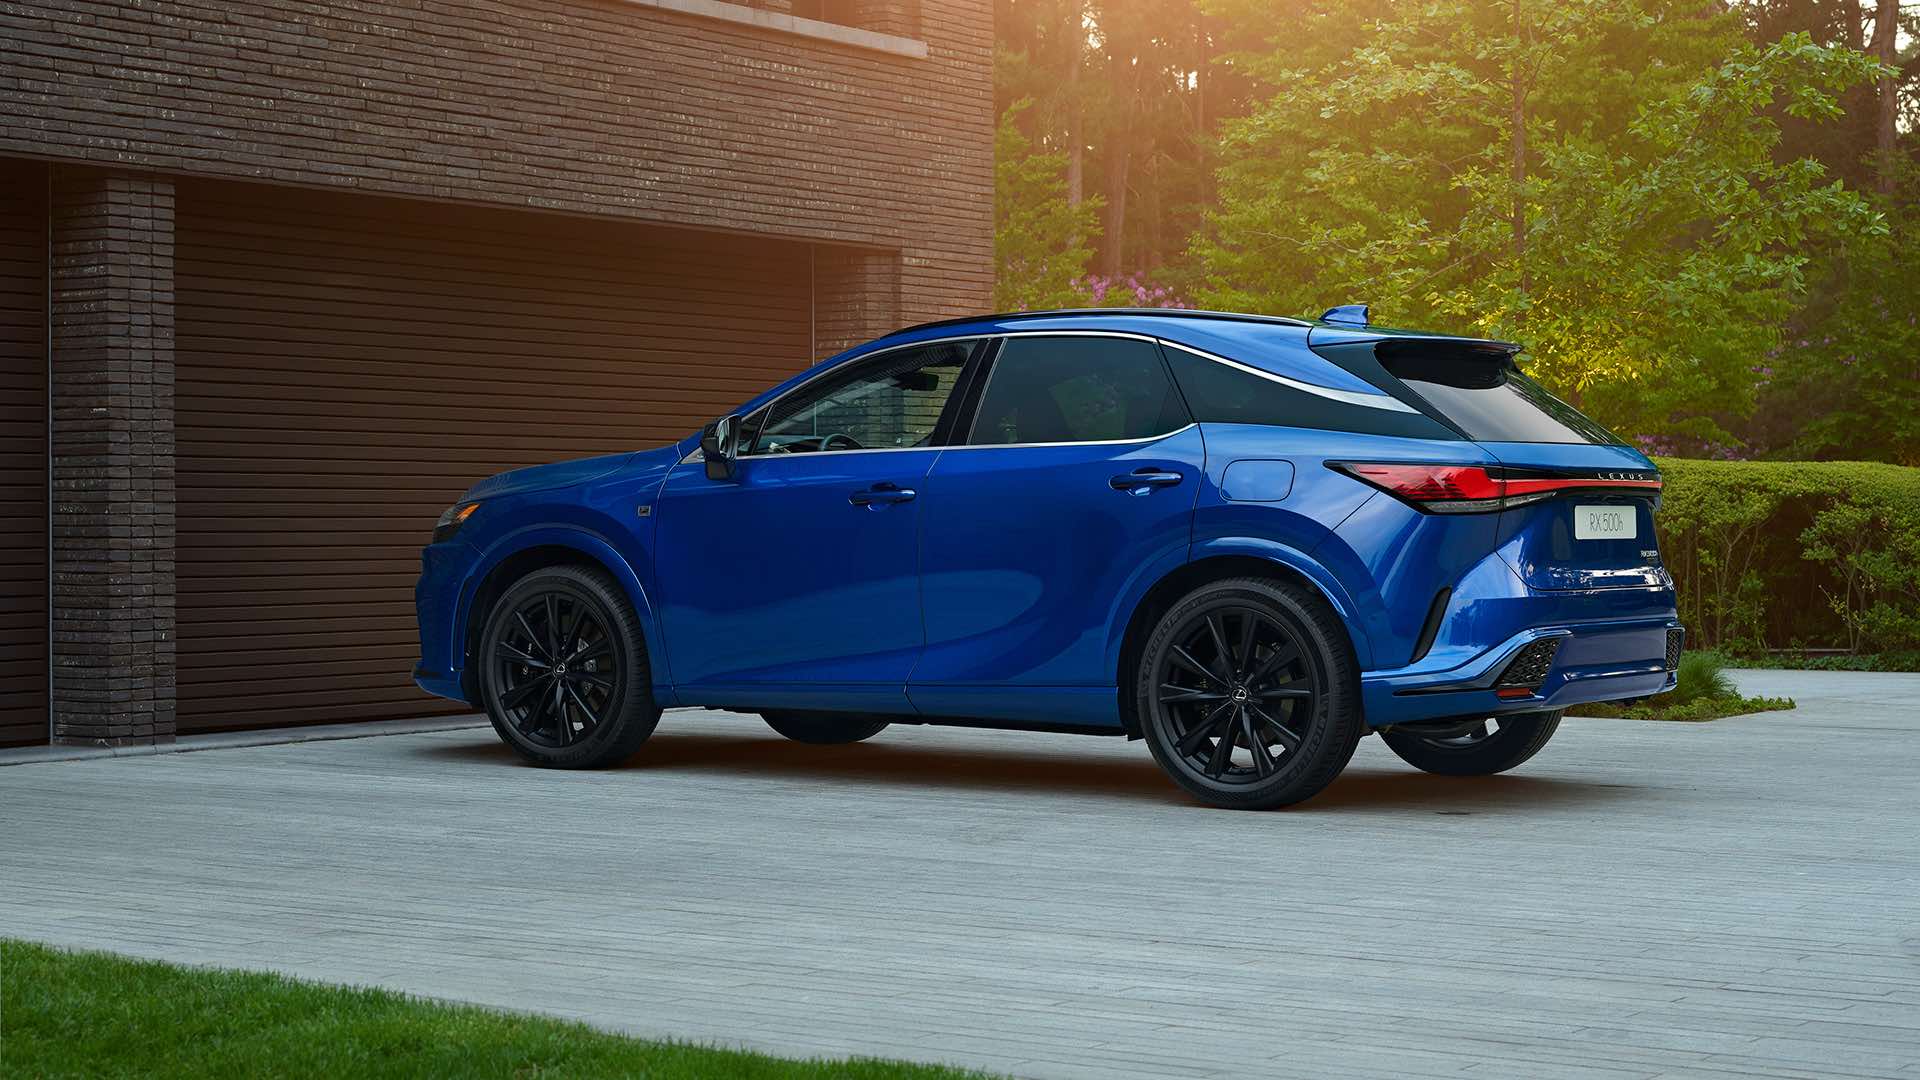 A sapphire blue Lexus RX sits on a concrete driveway. Greenery surrounds it, and a beam of sun brings the top and rear of the vehicle into focus.